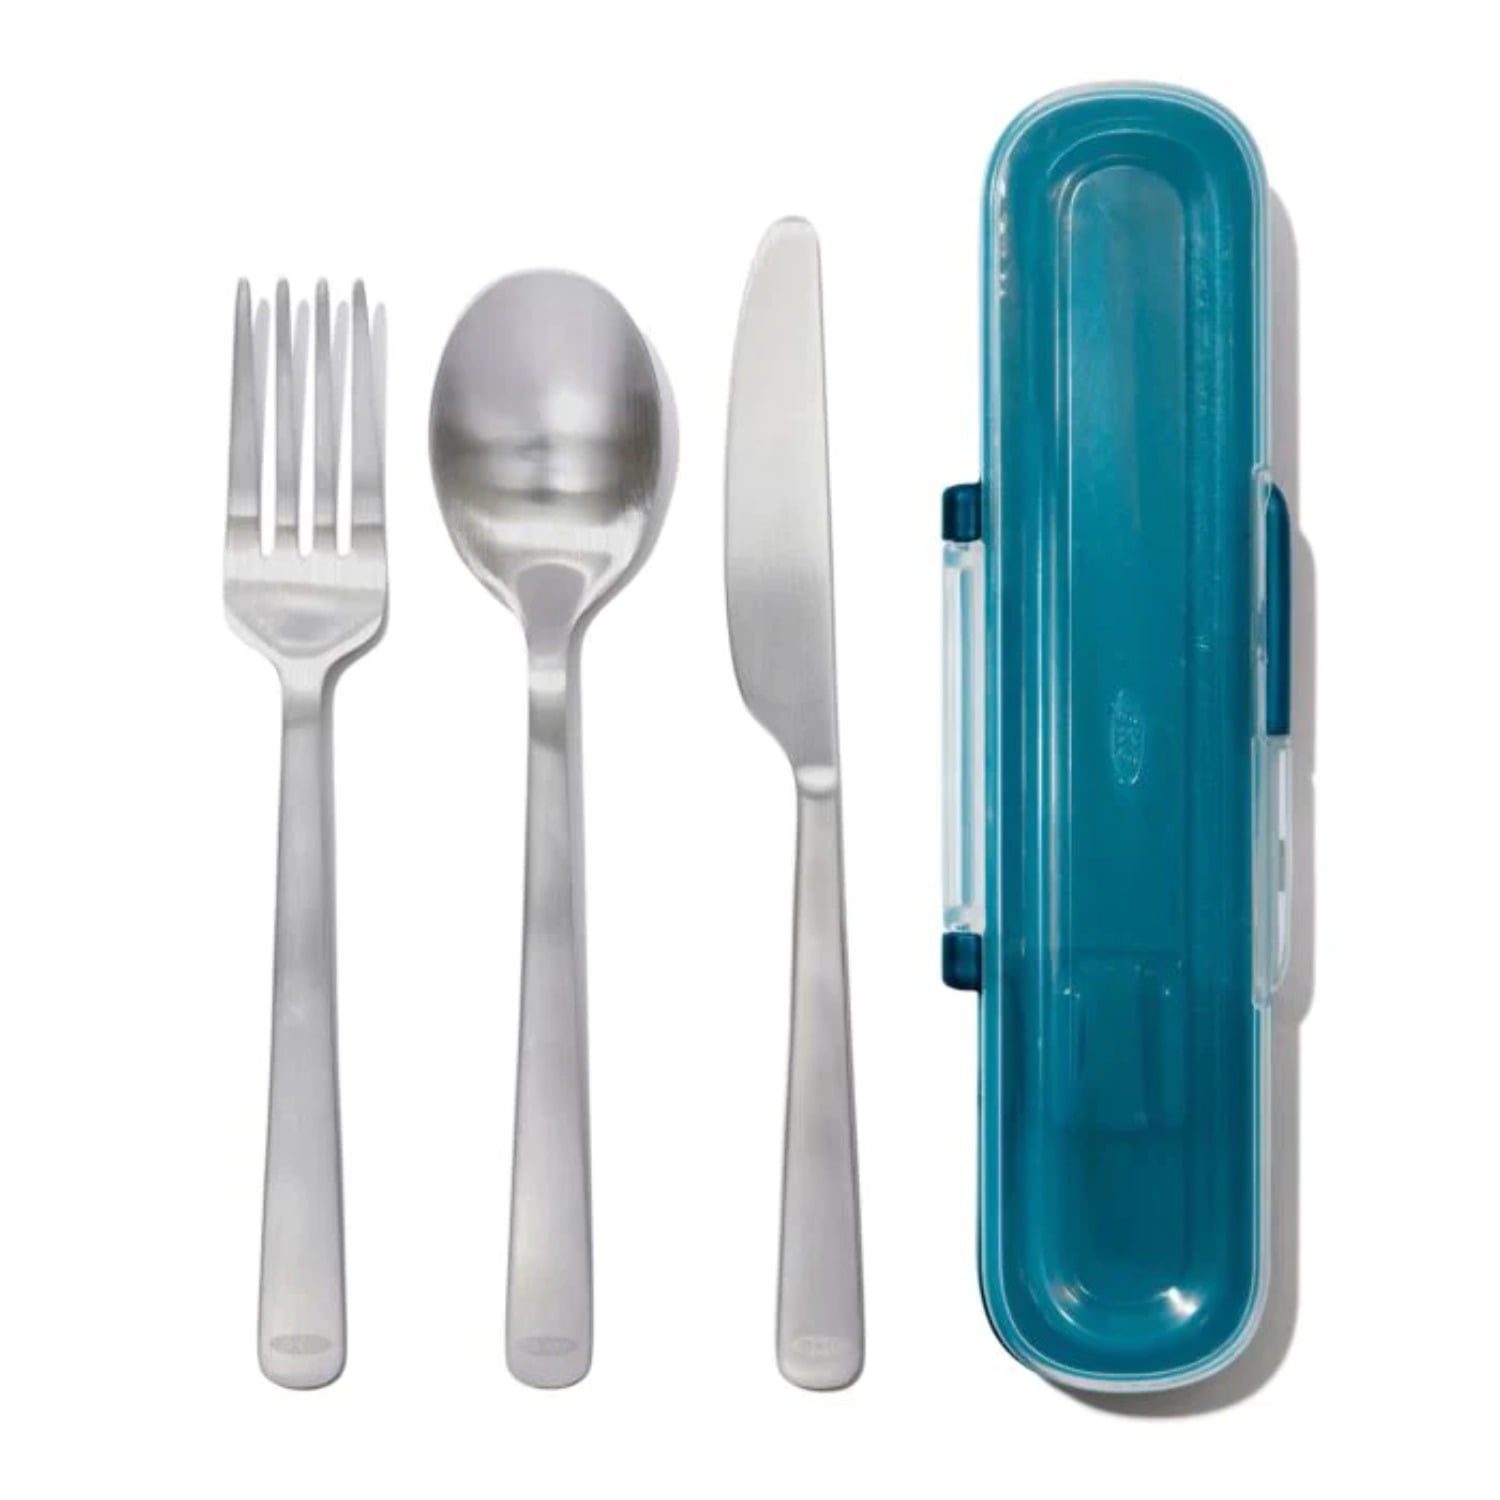 Cool Gear 3-Pack Travel Reusable Utensil Set with Slider Carry Case